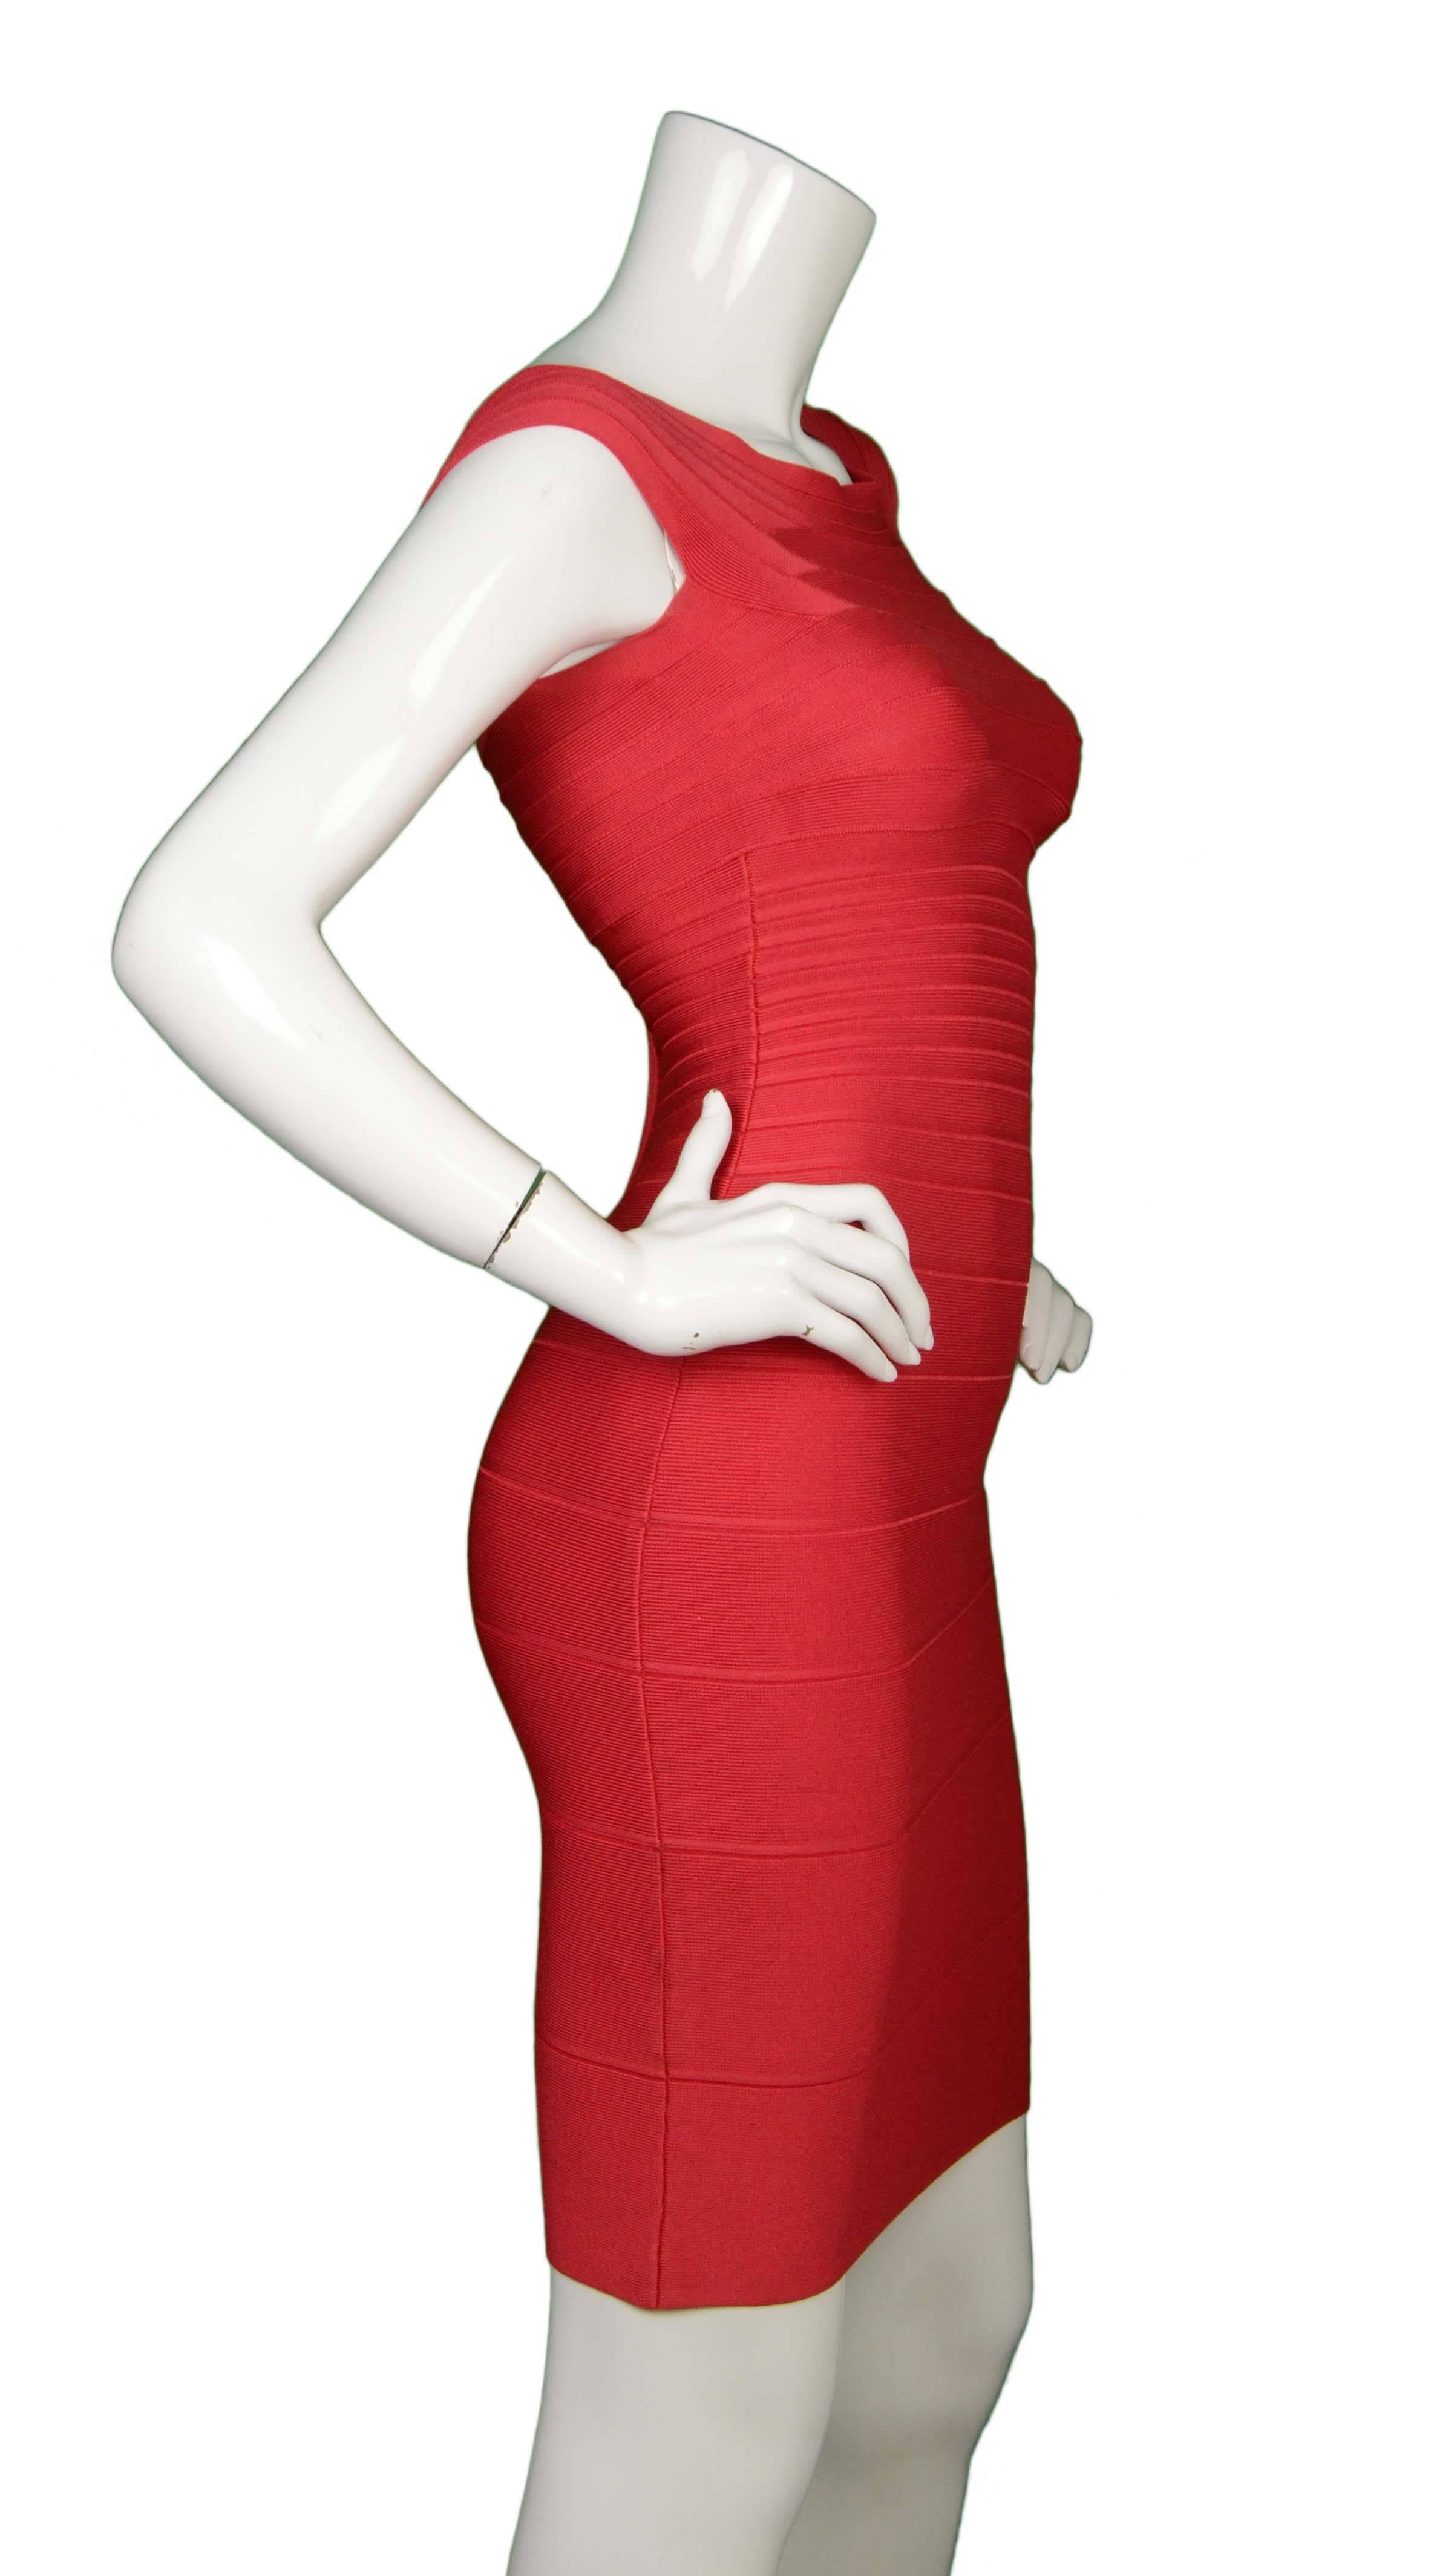 Herve Leger Poppy Red Off-The-Shoulder Bandage Dress
Made In: China
Color: Poppy/Red
Composition: 90% rayon, 9% nylon, 1% spandex
Lining: None
Closure/Opening: Back zip up closure
Exterior Pockets: None
Interior Pockets: None
Overall